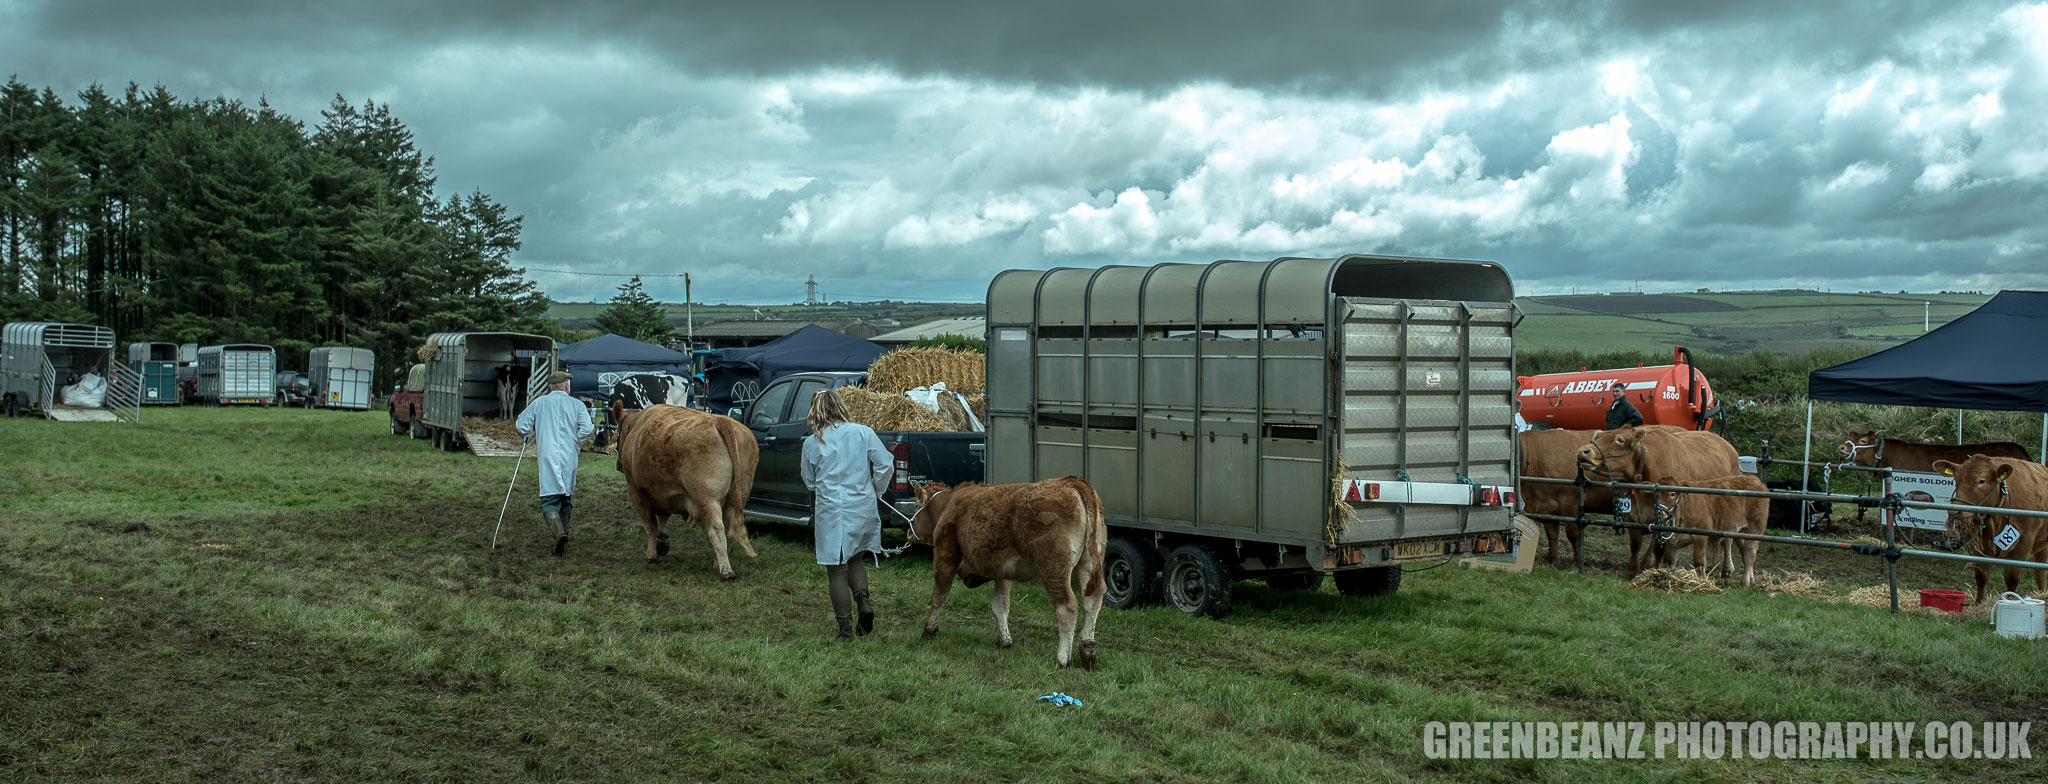 Camelford Show